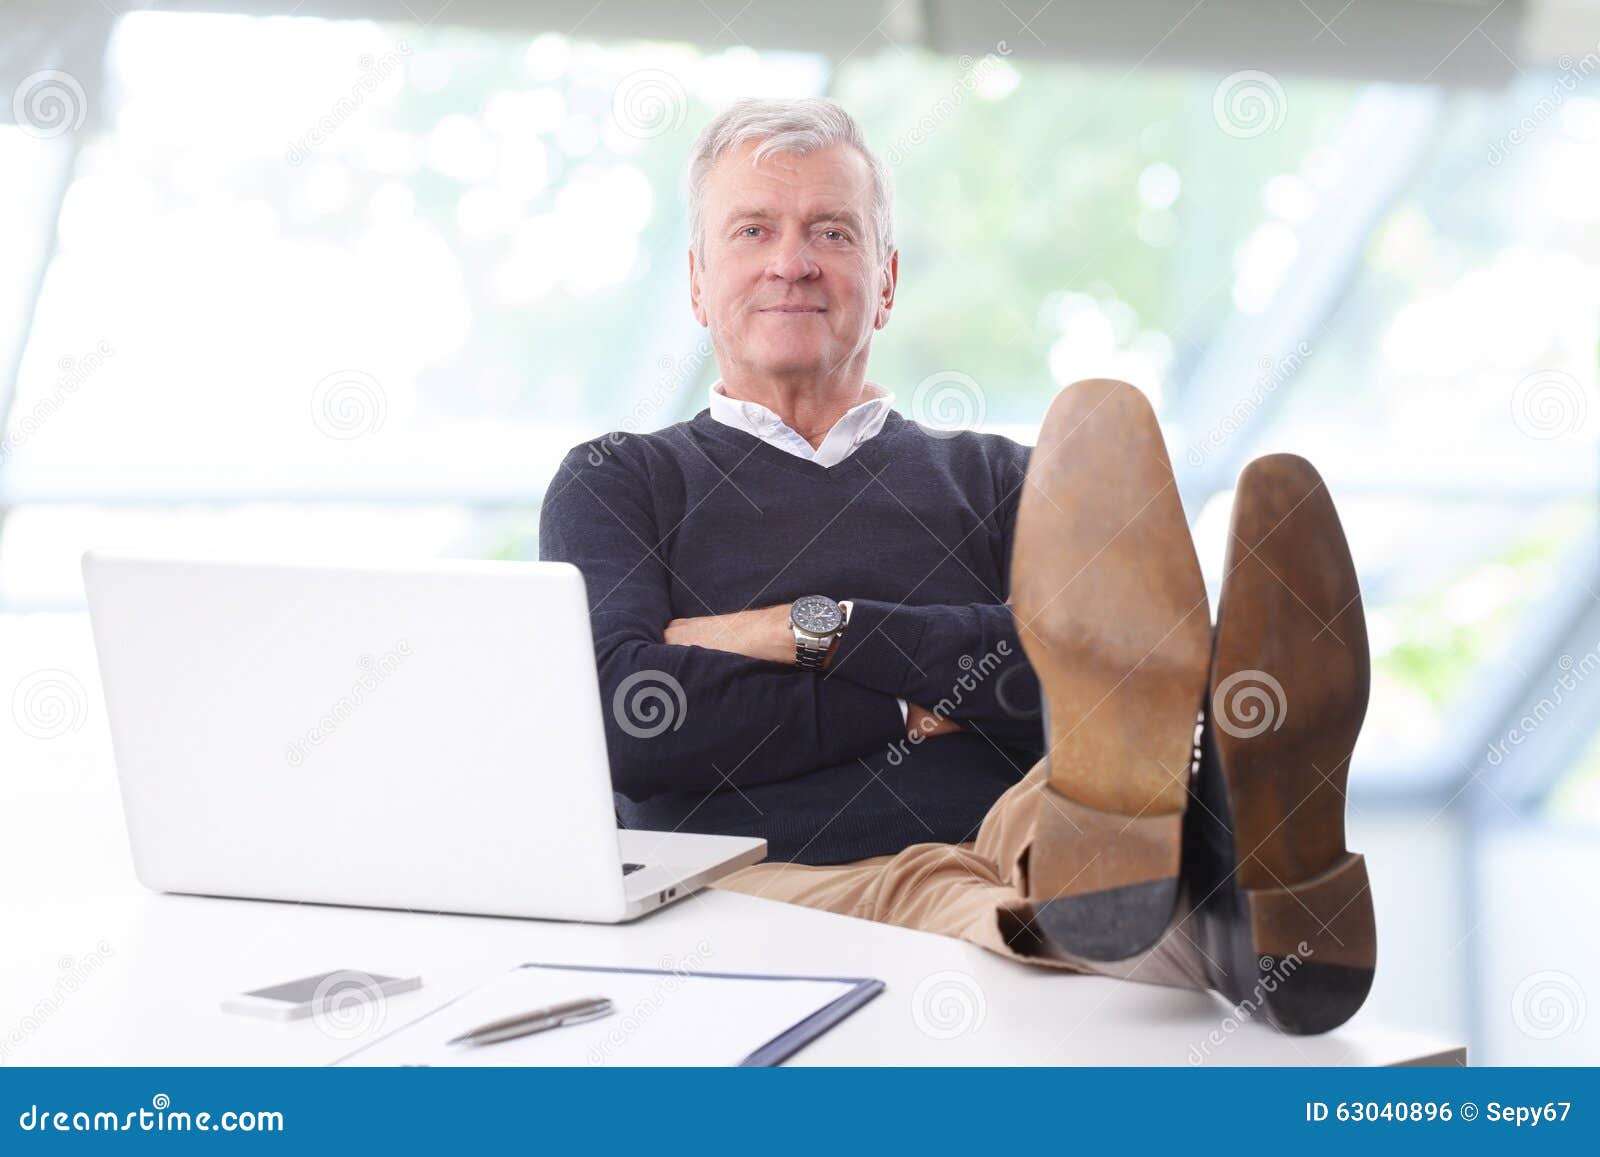 relaxed businessman